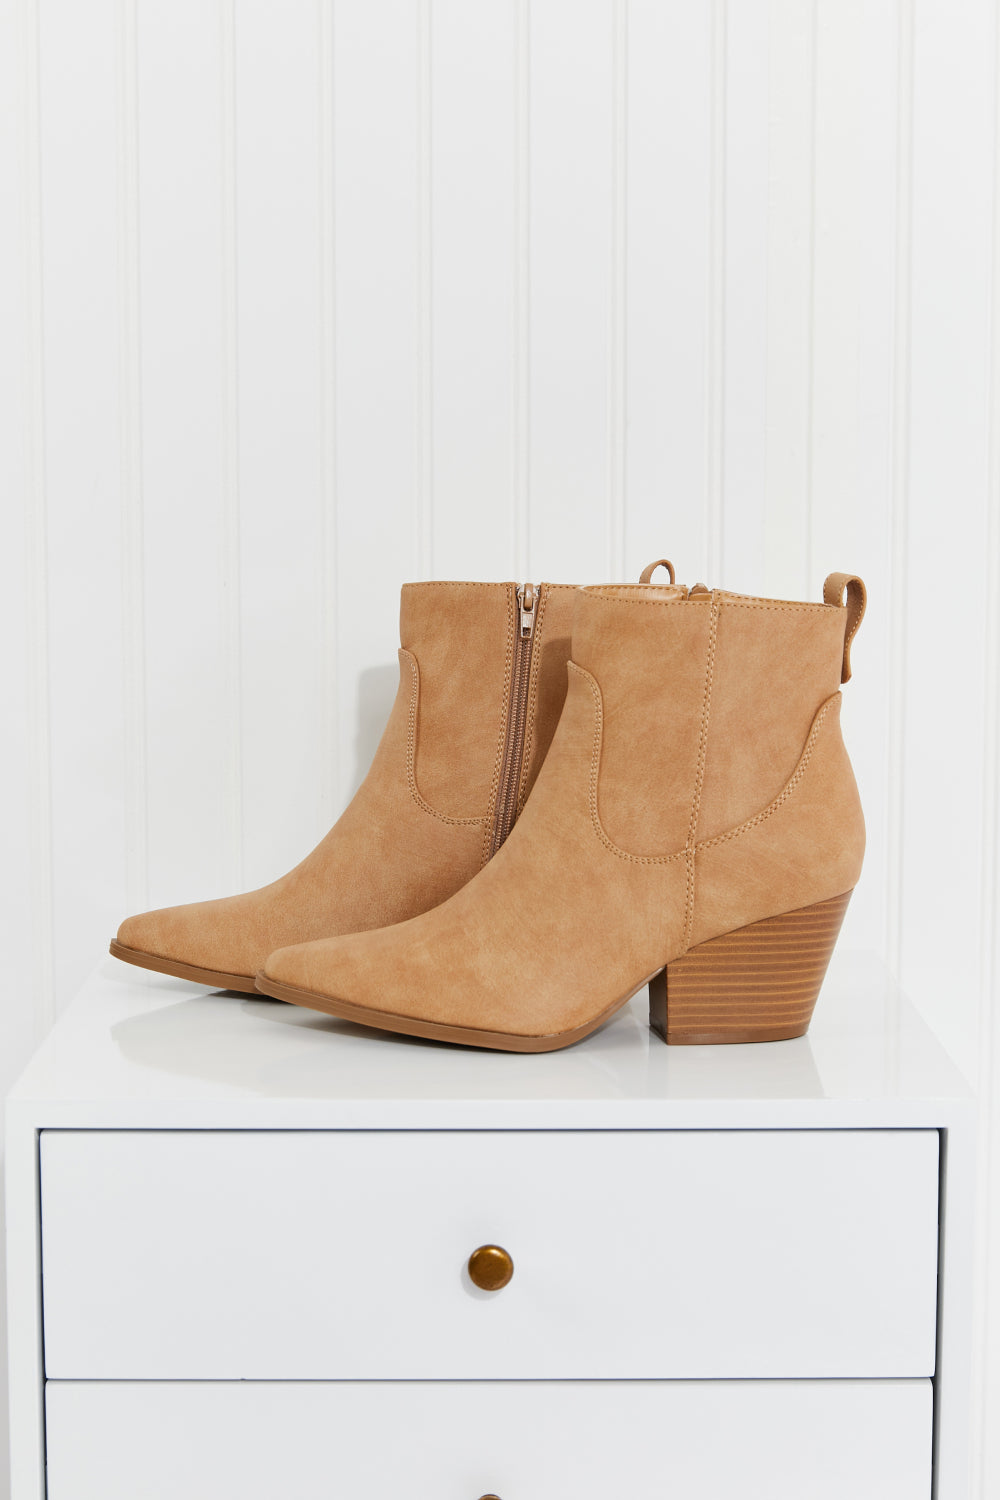 Qupid Finding Fort Worth Ankle Booties